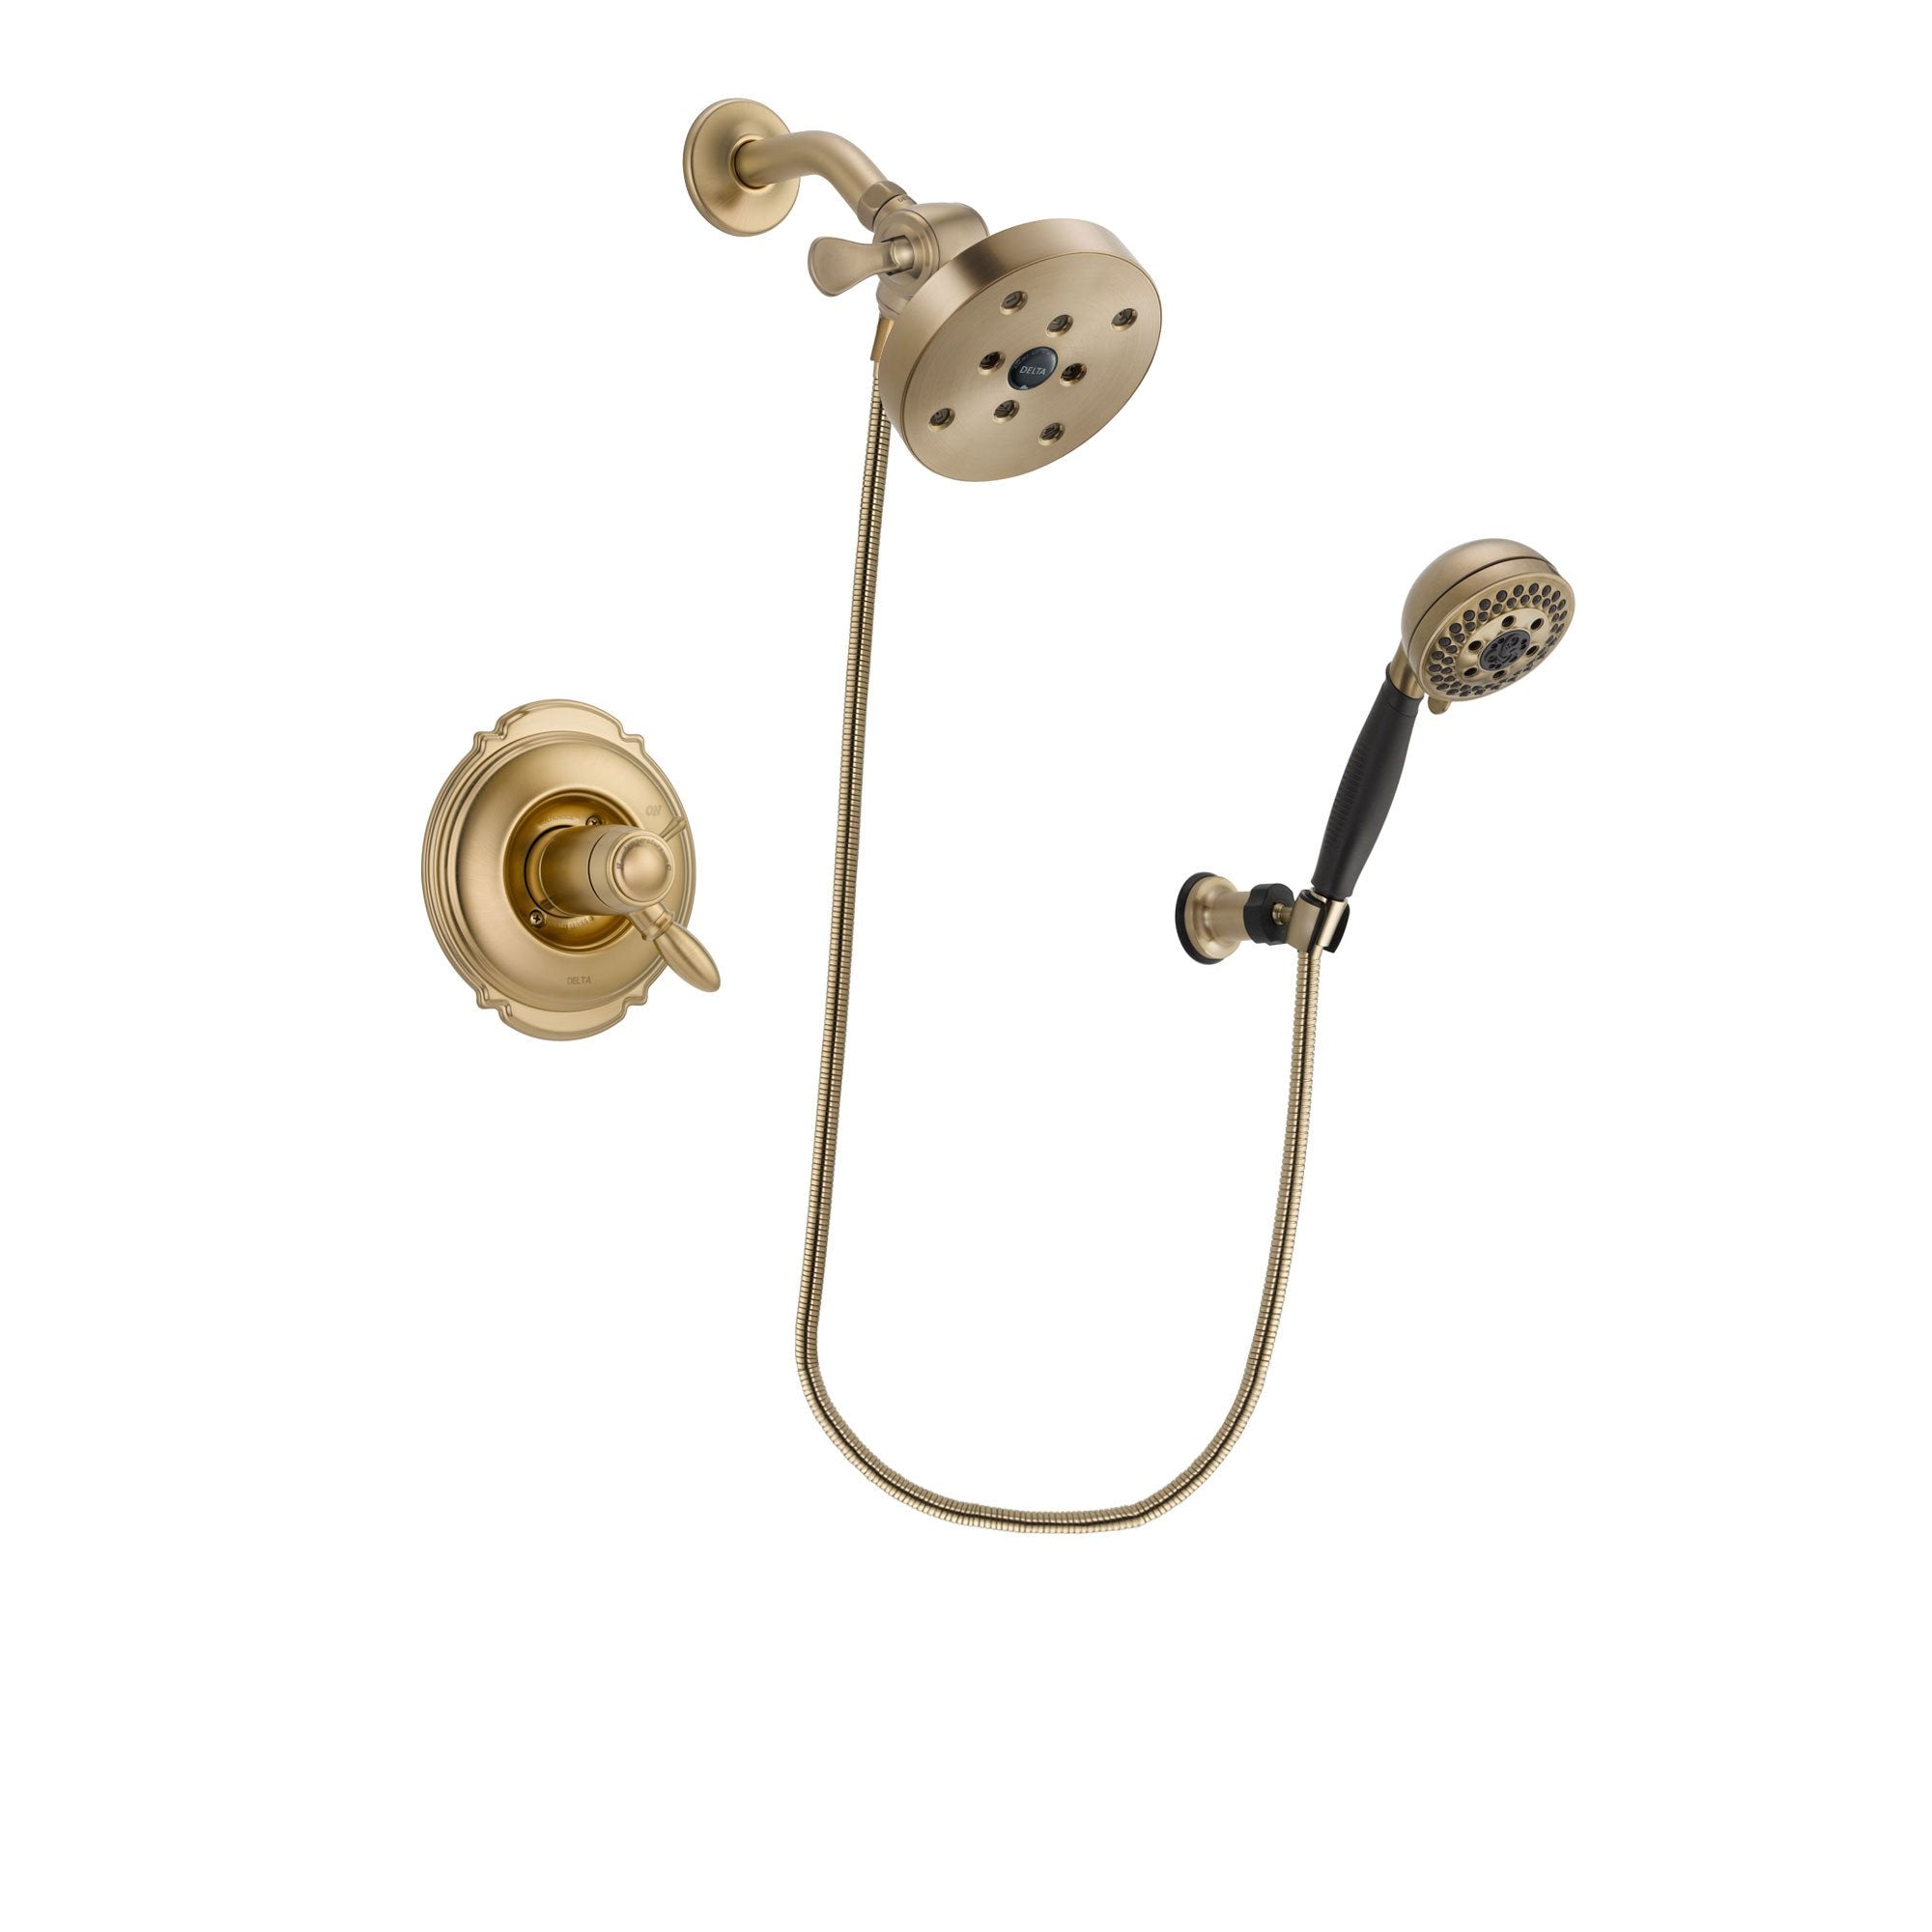 Delta Victorian Champagne Bronze Finish Thermostatic Shower Faucet System Package with 5-1/2 inch Showerhead and 5-Spray Wall Mount Hand Shower Includes Rough-in Valve DSP3814V